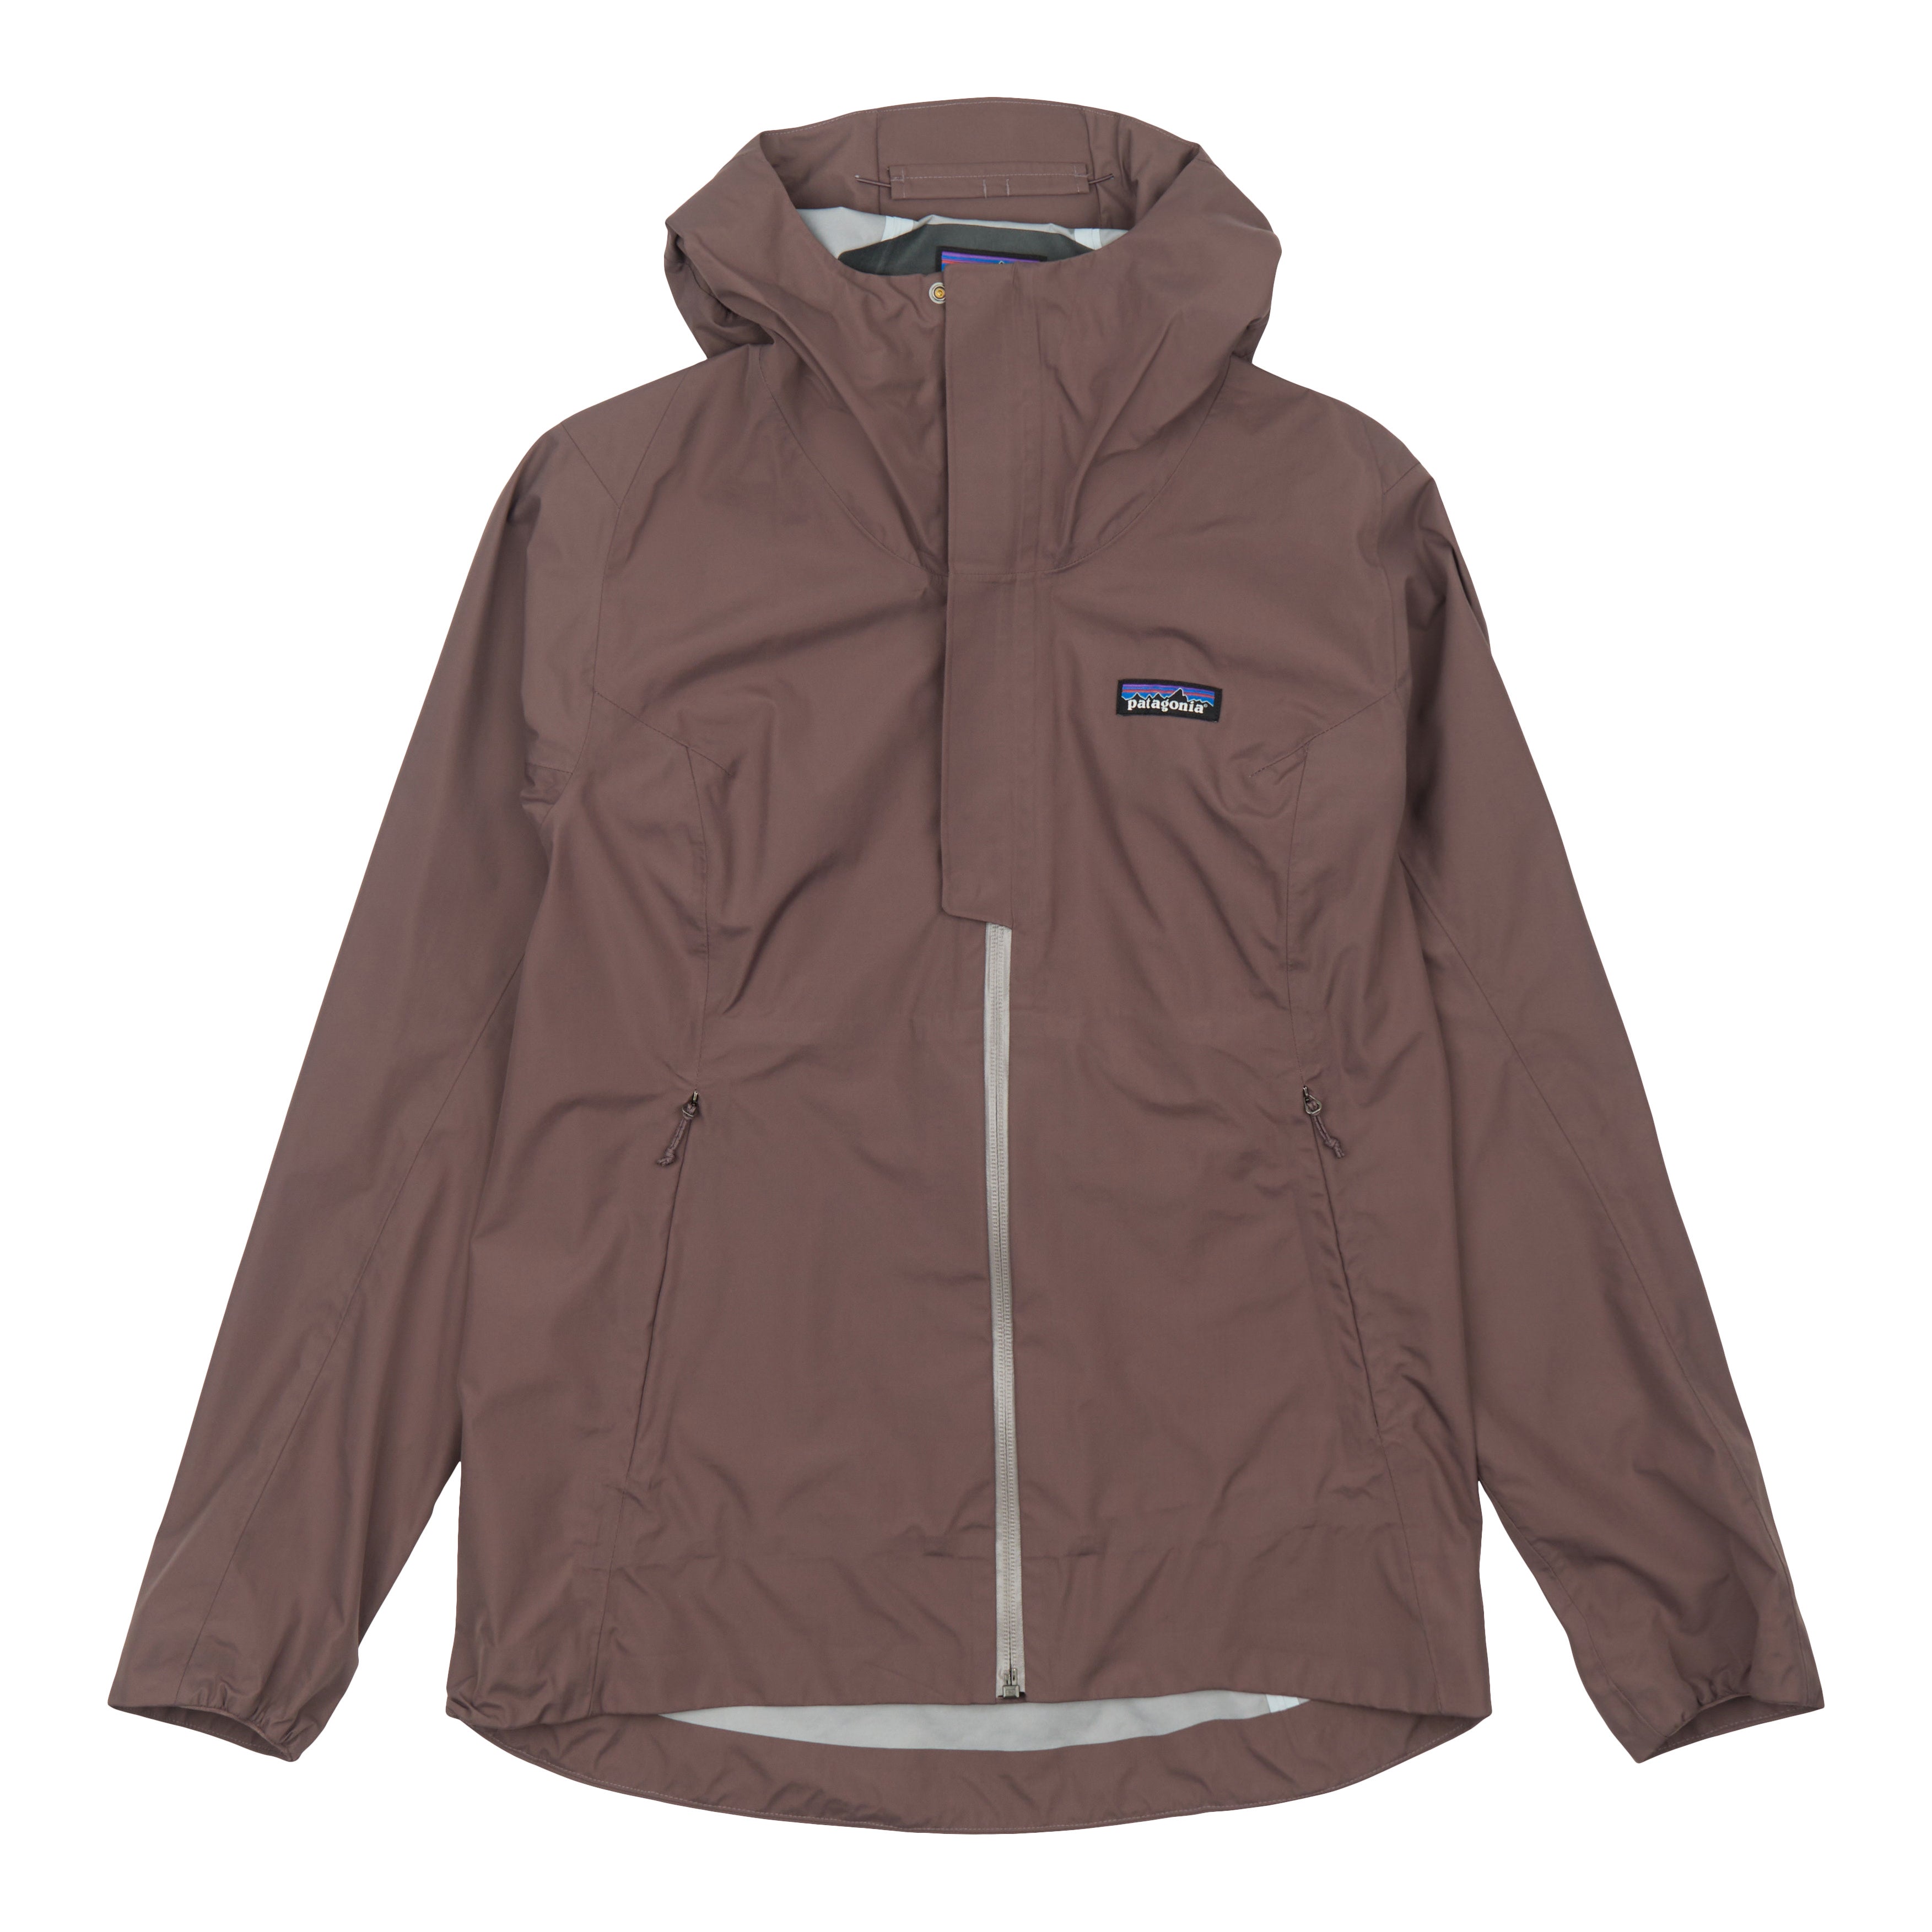 New Arrivals: Used & Second Hand Patagonia Clothing & Gear | Worn 